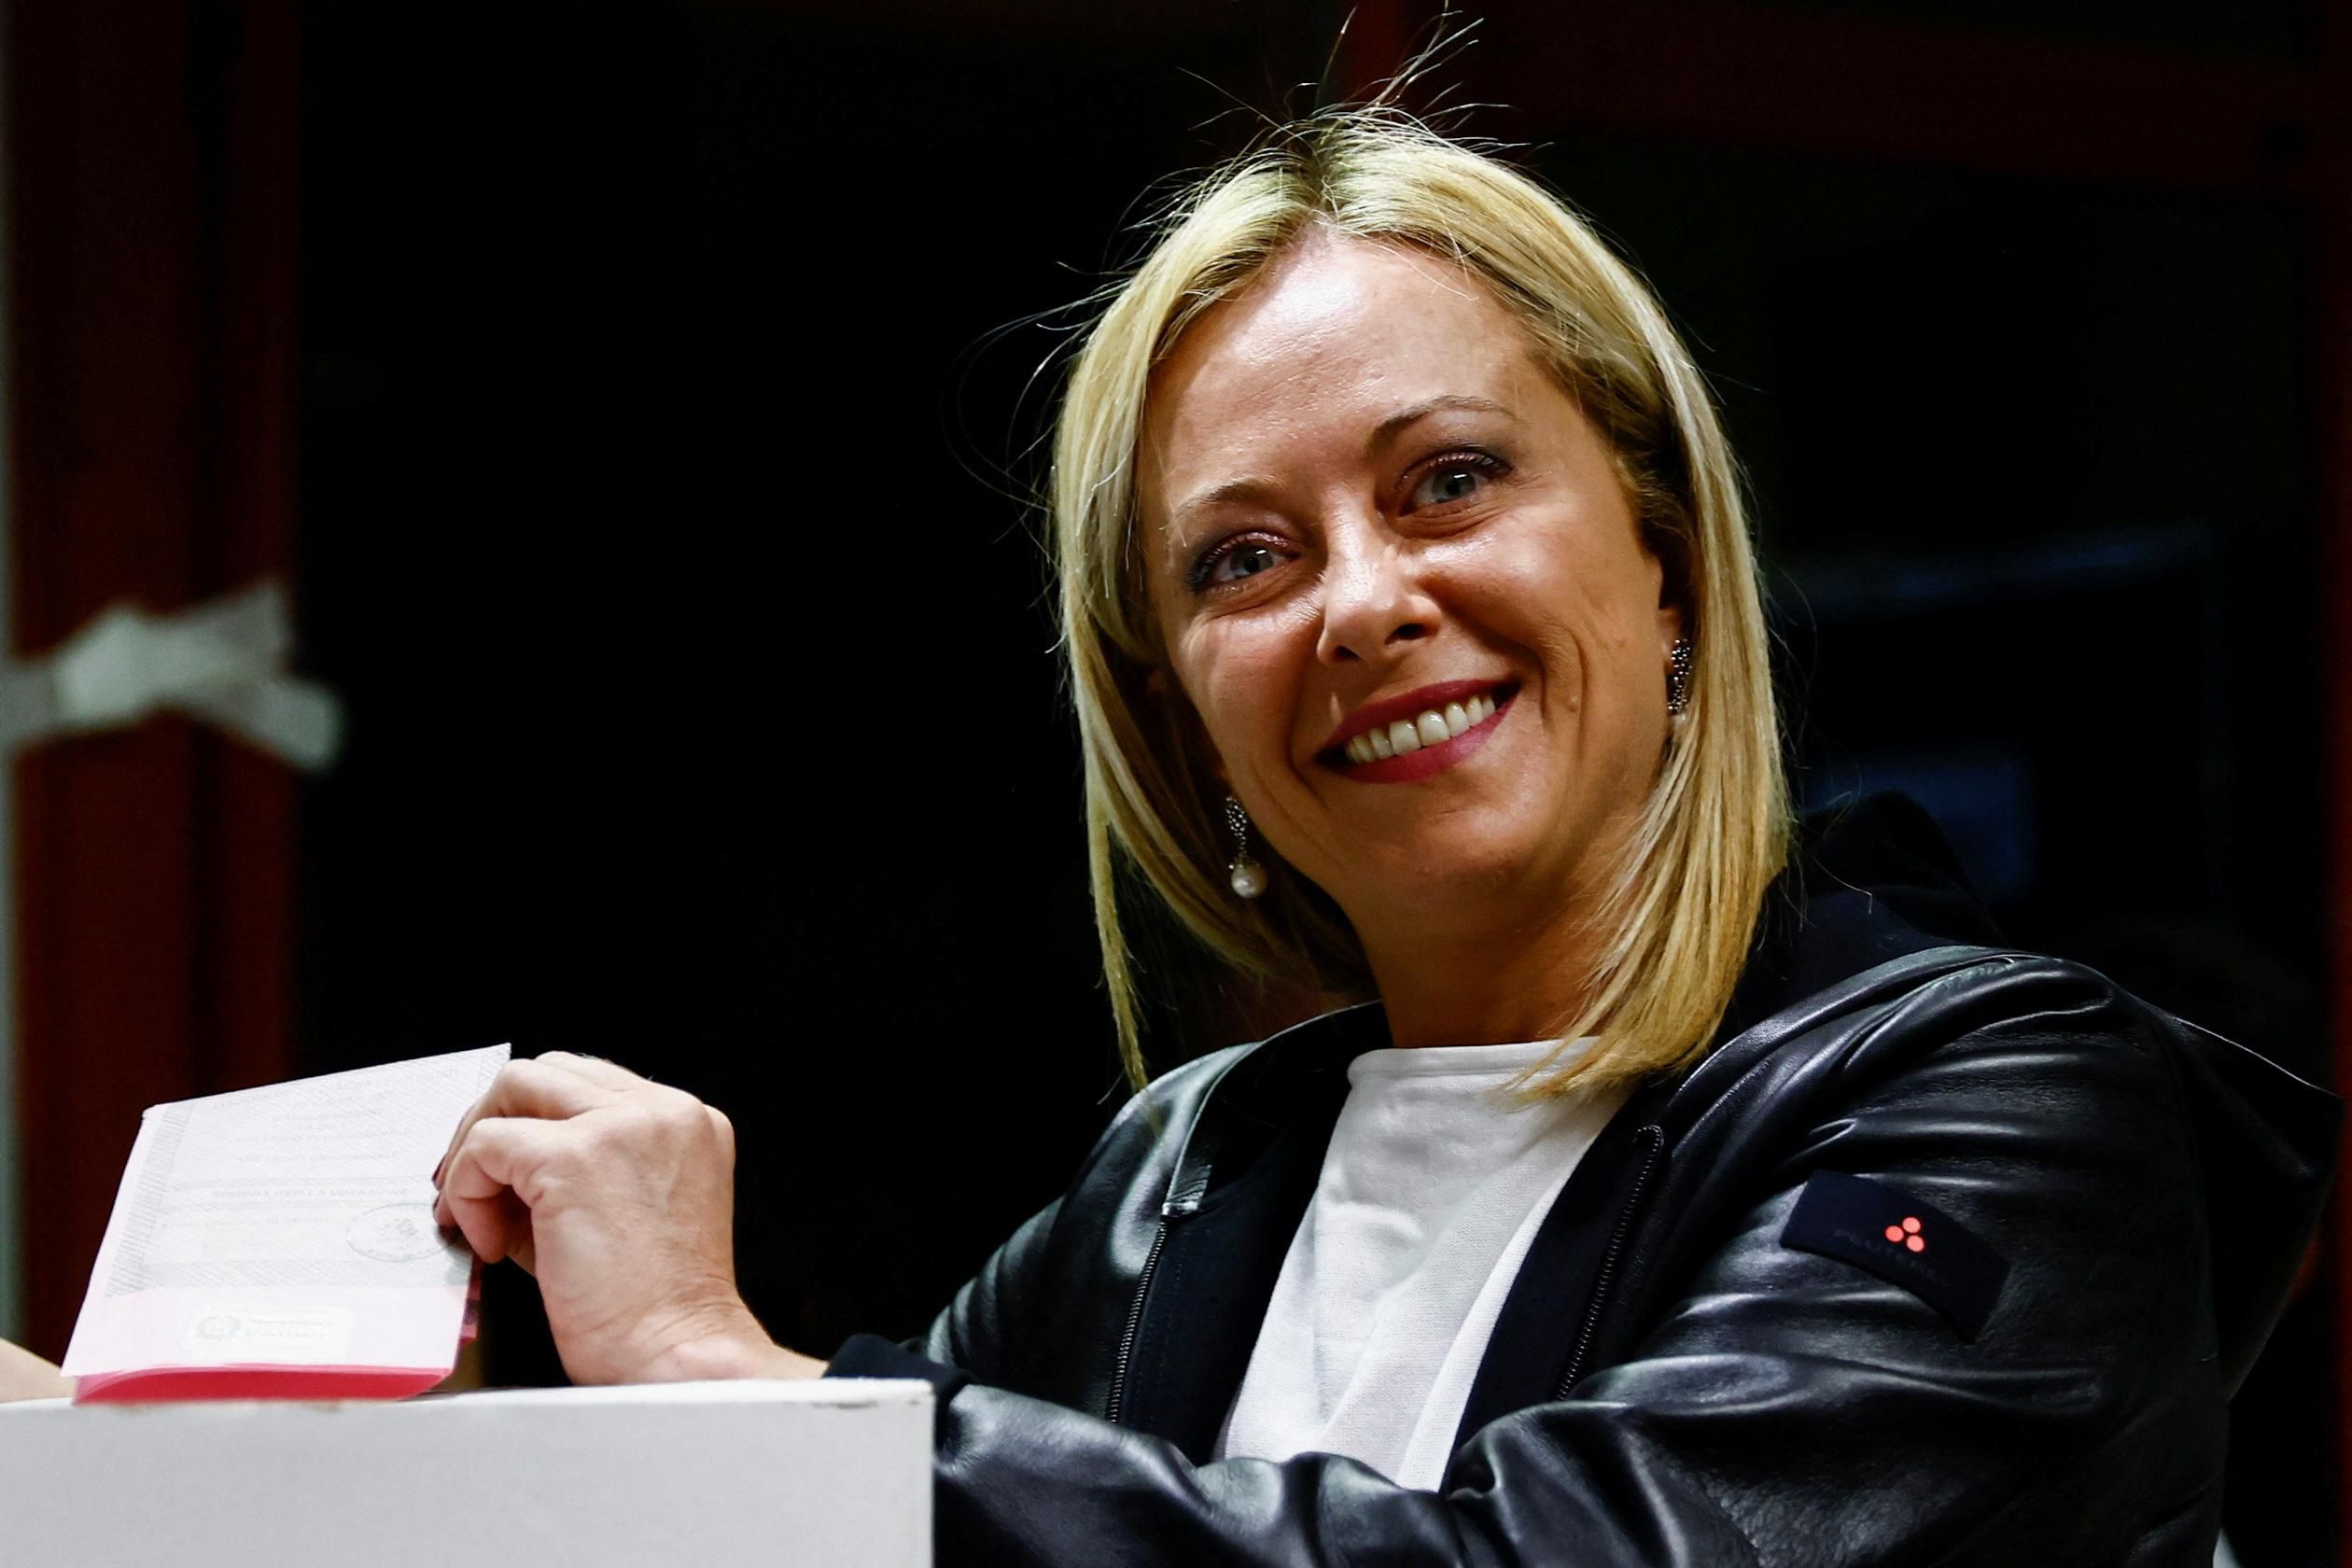 Brothers of Italy leader Giorgia Meloni poses with her ballot at a polling station in Rome. 